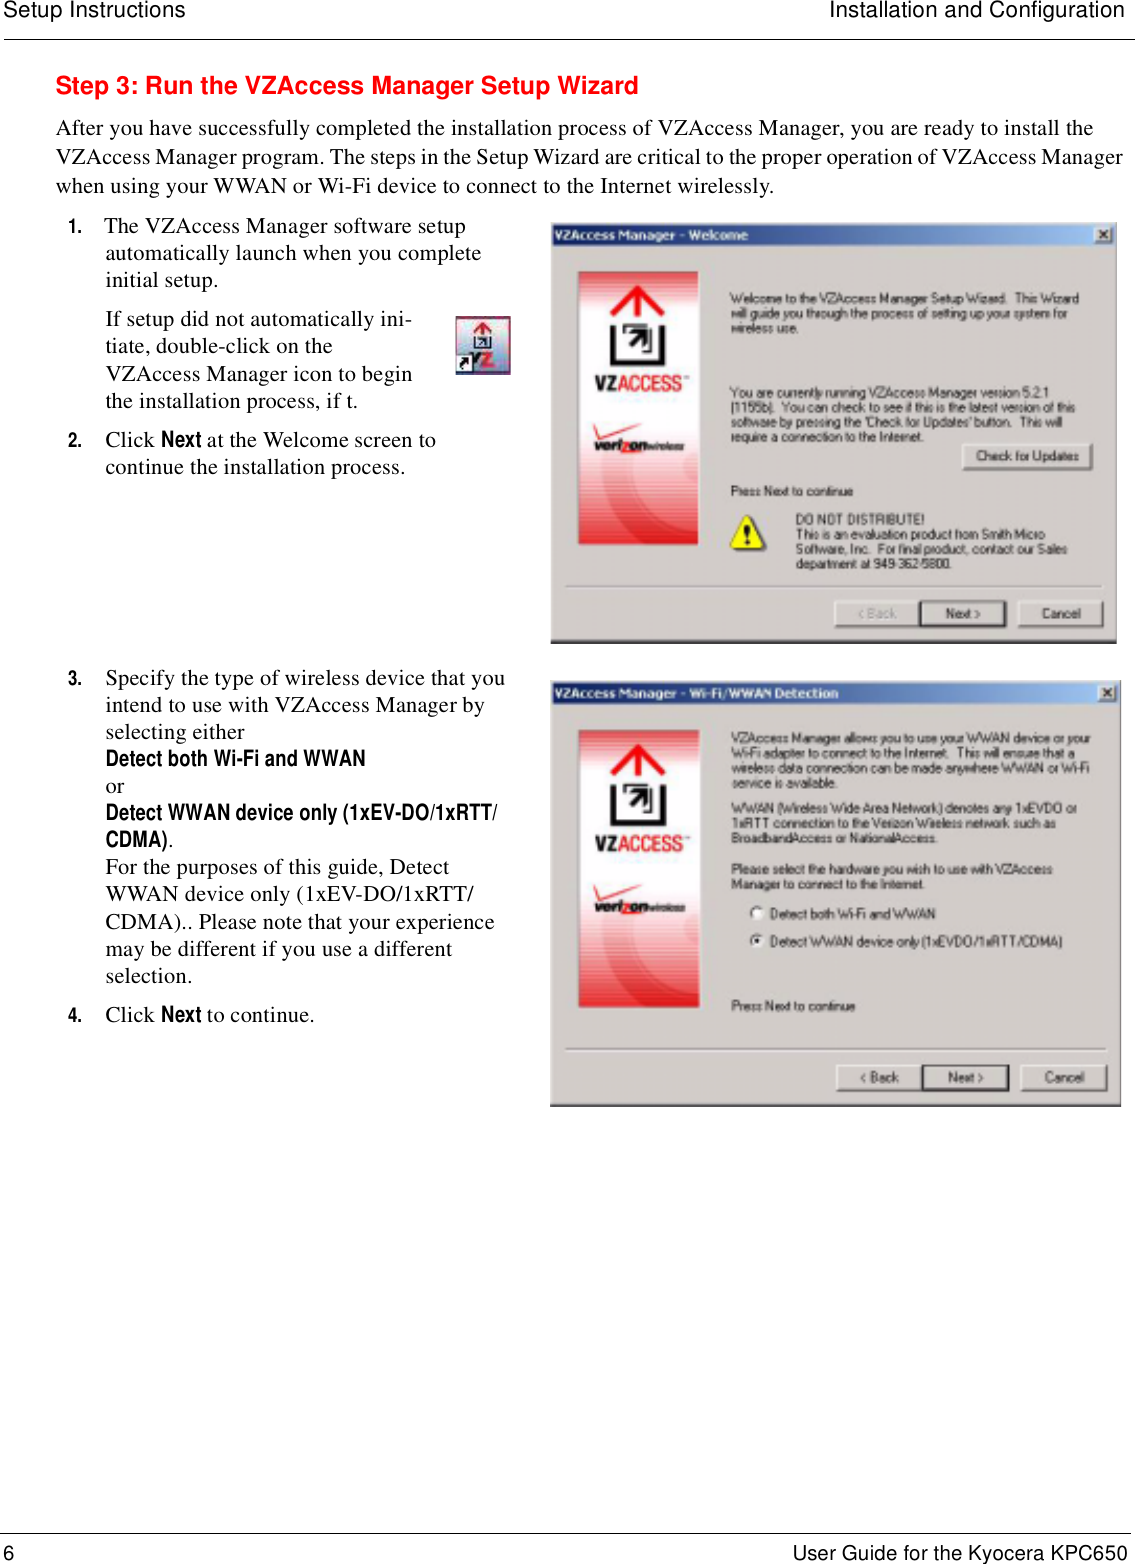 Setup Instructions Installation and Configuration6 User Guide for the Kyocera KPC650Step 3: Run the VZAccess Manager Setup WizardAfter you have successfully completed the installation process of VZAccess Manager, you are ready to install the VZAccess Manager program. The steps in the Setup Wizard are critical to the proper operation of VZAccess Manager when using your WWAN or Wi-Fi device to connect to the Internet wirelessly.1. The VZAccess Manager software setup automatically launch when you complete initial setup.If setup did not automatically ini-tiate, double-click on the VZAccess Manager icon to begin the installation process, if t.2. Click Next at the Welcome screen to continue the installation process.3. Specify the type of wireless device that you intend to use with VZAccess Manager by selecting either Detect both Wi-Fi and WWAN or Detect WWAN device only (1xEV-DO/1xRTT/CDMA). For the purposes of this guide, Detect WWAN device only (1xEV-DO/1xRTT/CDMA).. Please note that your experience may be different if you use a different selection. 4. Click Next to continue.